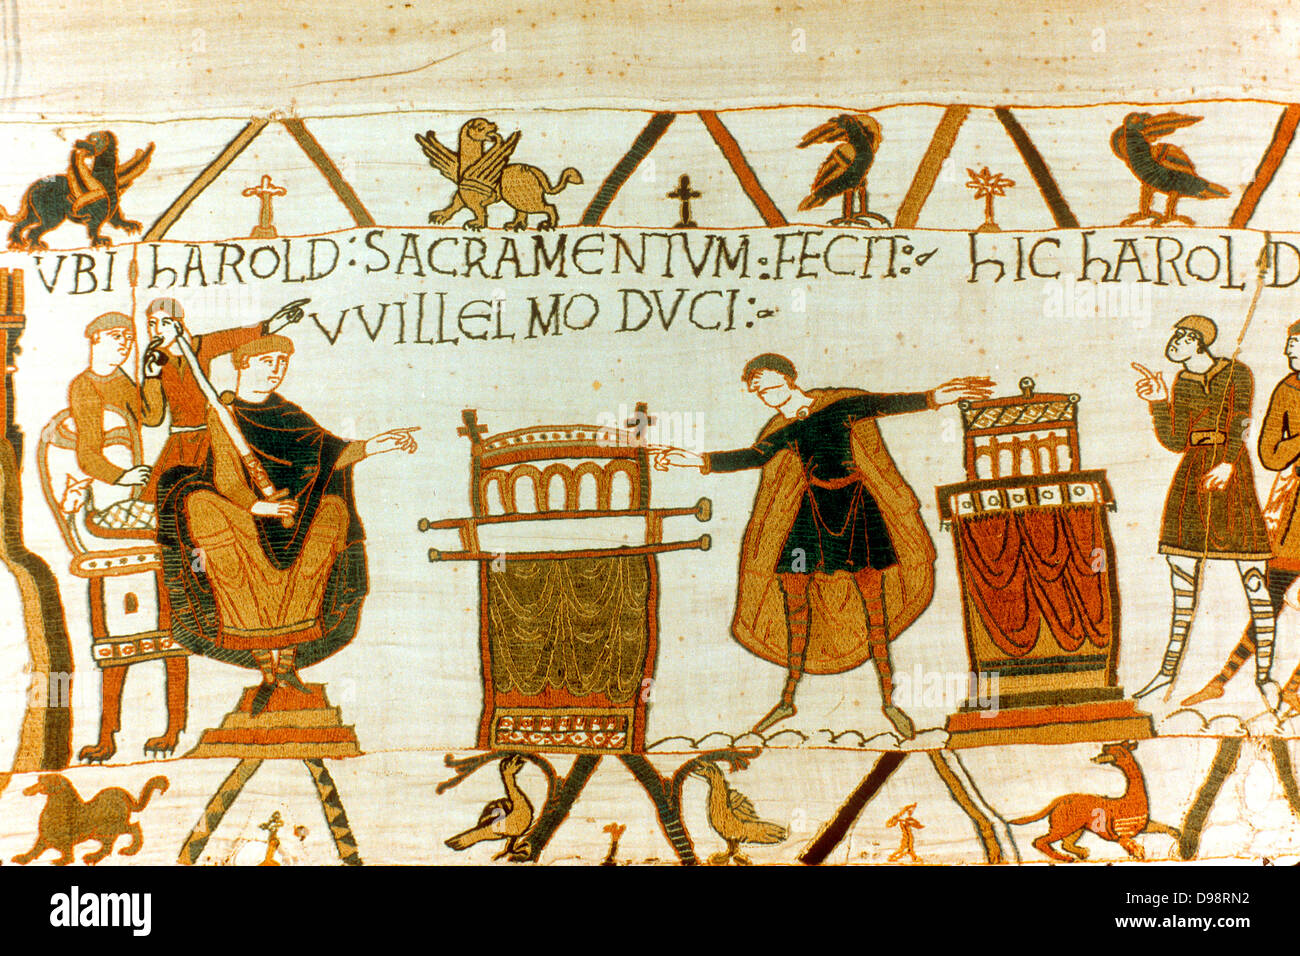 Bayeux Tapestry 1067: Harold Godwinson, Earl of Wessex (Harold II) swearing oath of fealty to William of Normandy (William I, the Conqueror) on holy relics, 1064. William used this oath to boost his claim to English throne. Textile Stock Photo